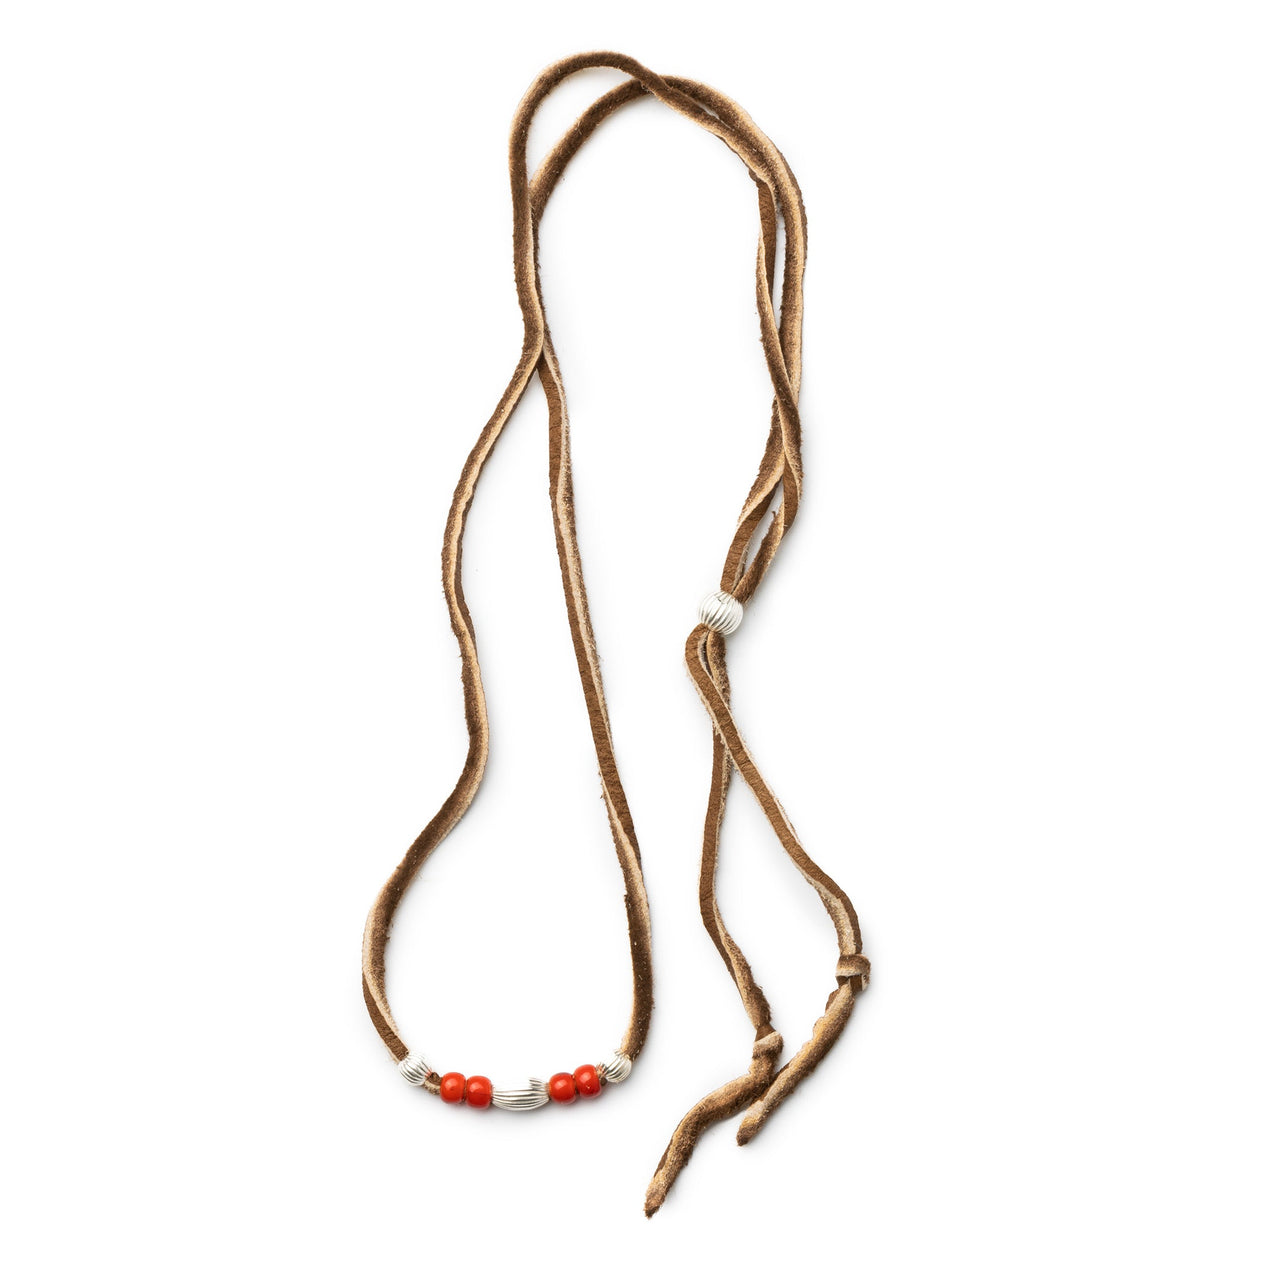 First Arrow's Leather Necklace w/beads Brown-Necklace-Clutch Cafe